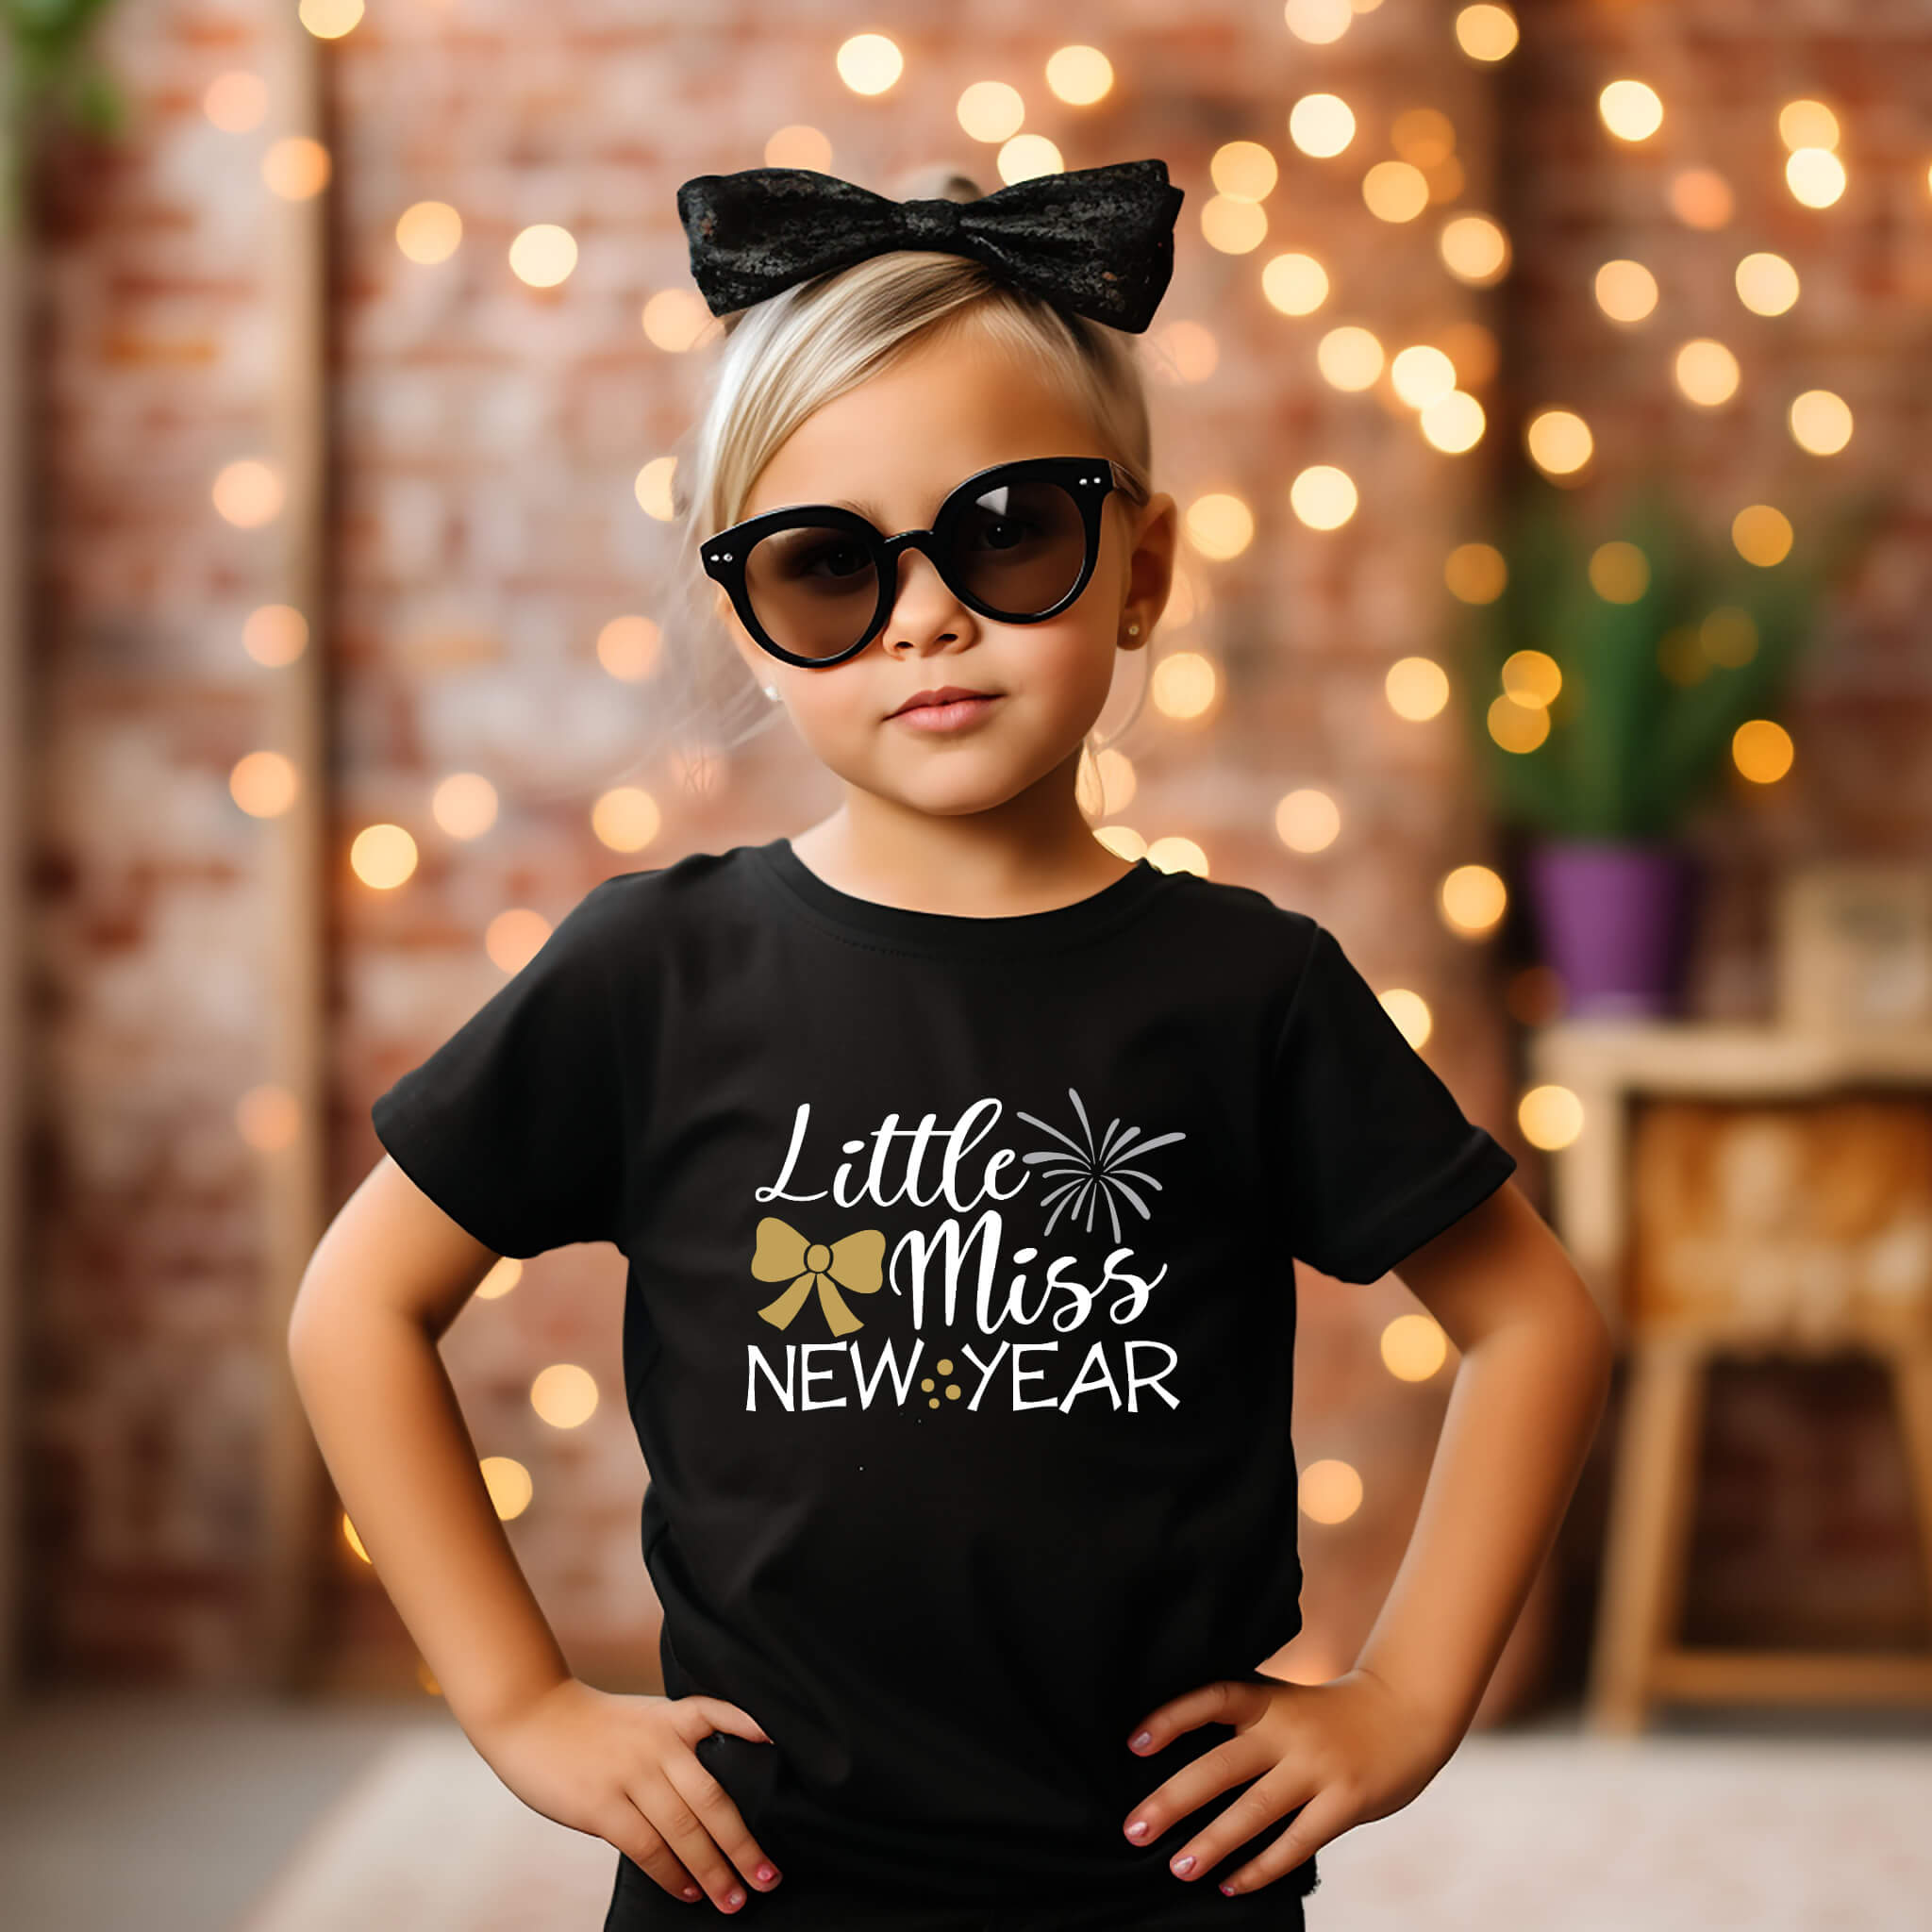 New Year's Fancy Little Miss New Year Baby Girl's Onesie Graphic Print T-Shirt